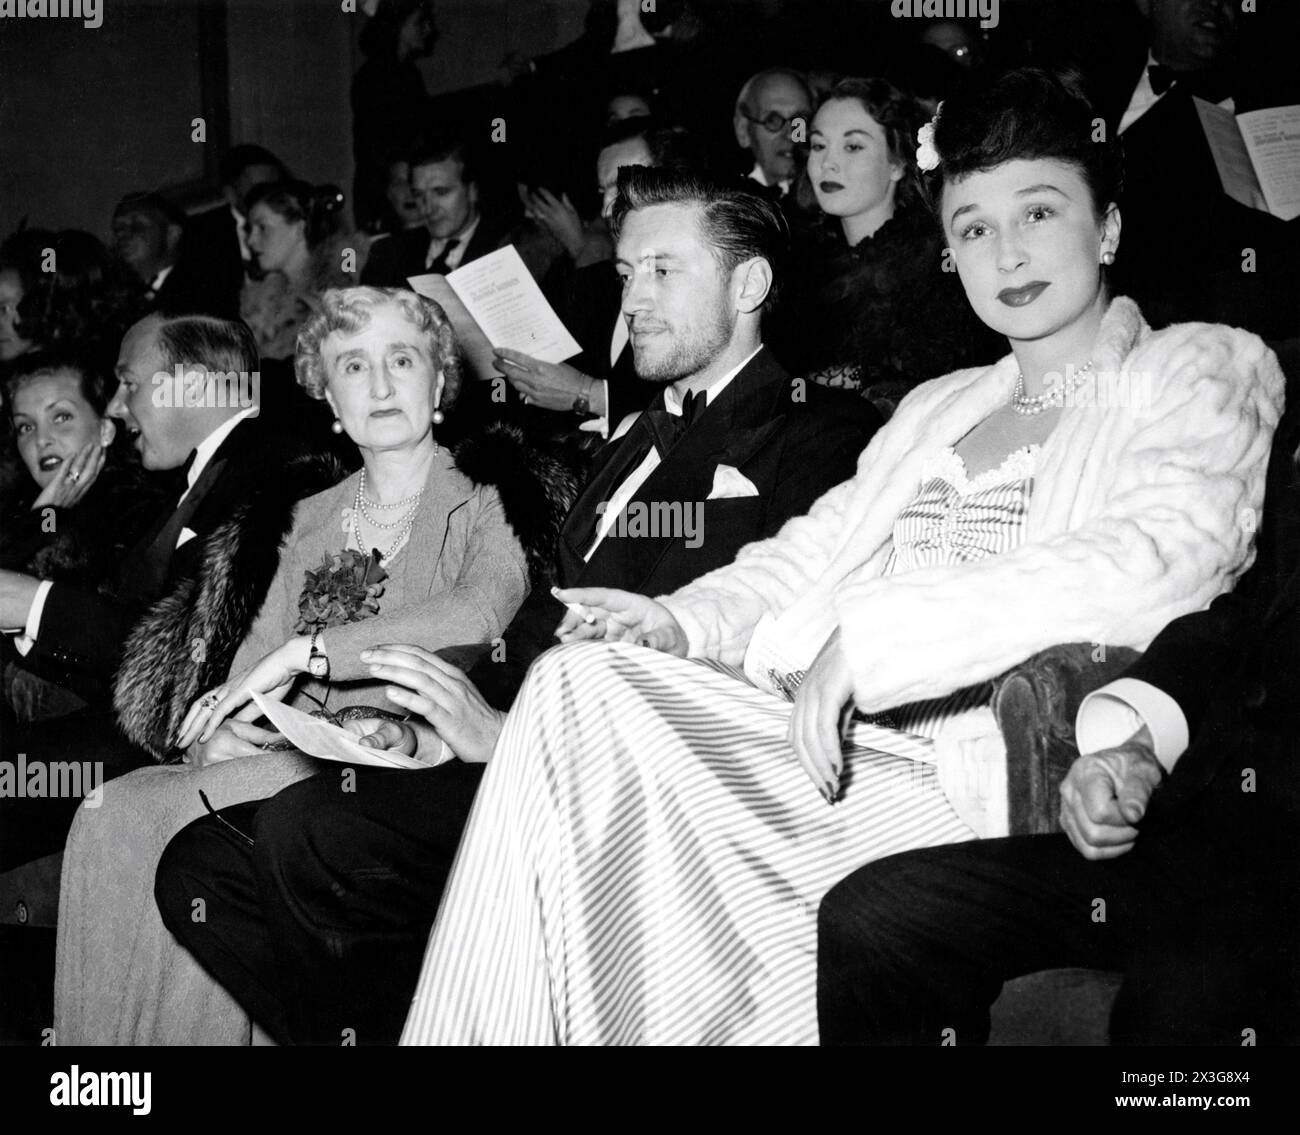 PATRICIA ROC RONALD NEAME Mrs. WITHERS (mother of Googie) JOHN McCALLUM HAZEL COURT (behind) and GOOGIE WITHERS at the premiere at The New Gallery cinema, Regent Street, London in June 1947 of GOOGIE WITHERS JEAN KENT and JOHN McCALLUM in THE LOVES OF JOANNA GODDEN 1947 directors CHARLES FREND and (uncredited) ROBERT HAMER novel Sheila Kaye-Smith screenplay H.E. Bates music Ralph Vaughan Williams producer Michael Balcon Ealing Studios / General Film Distributors (GFD) Stock Photo